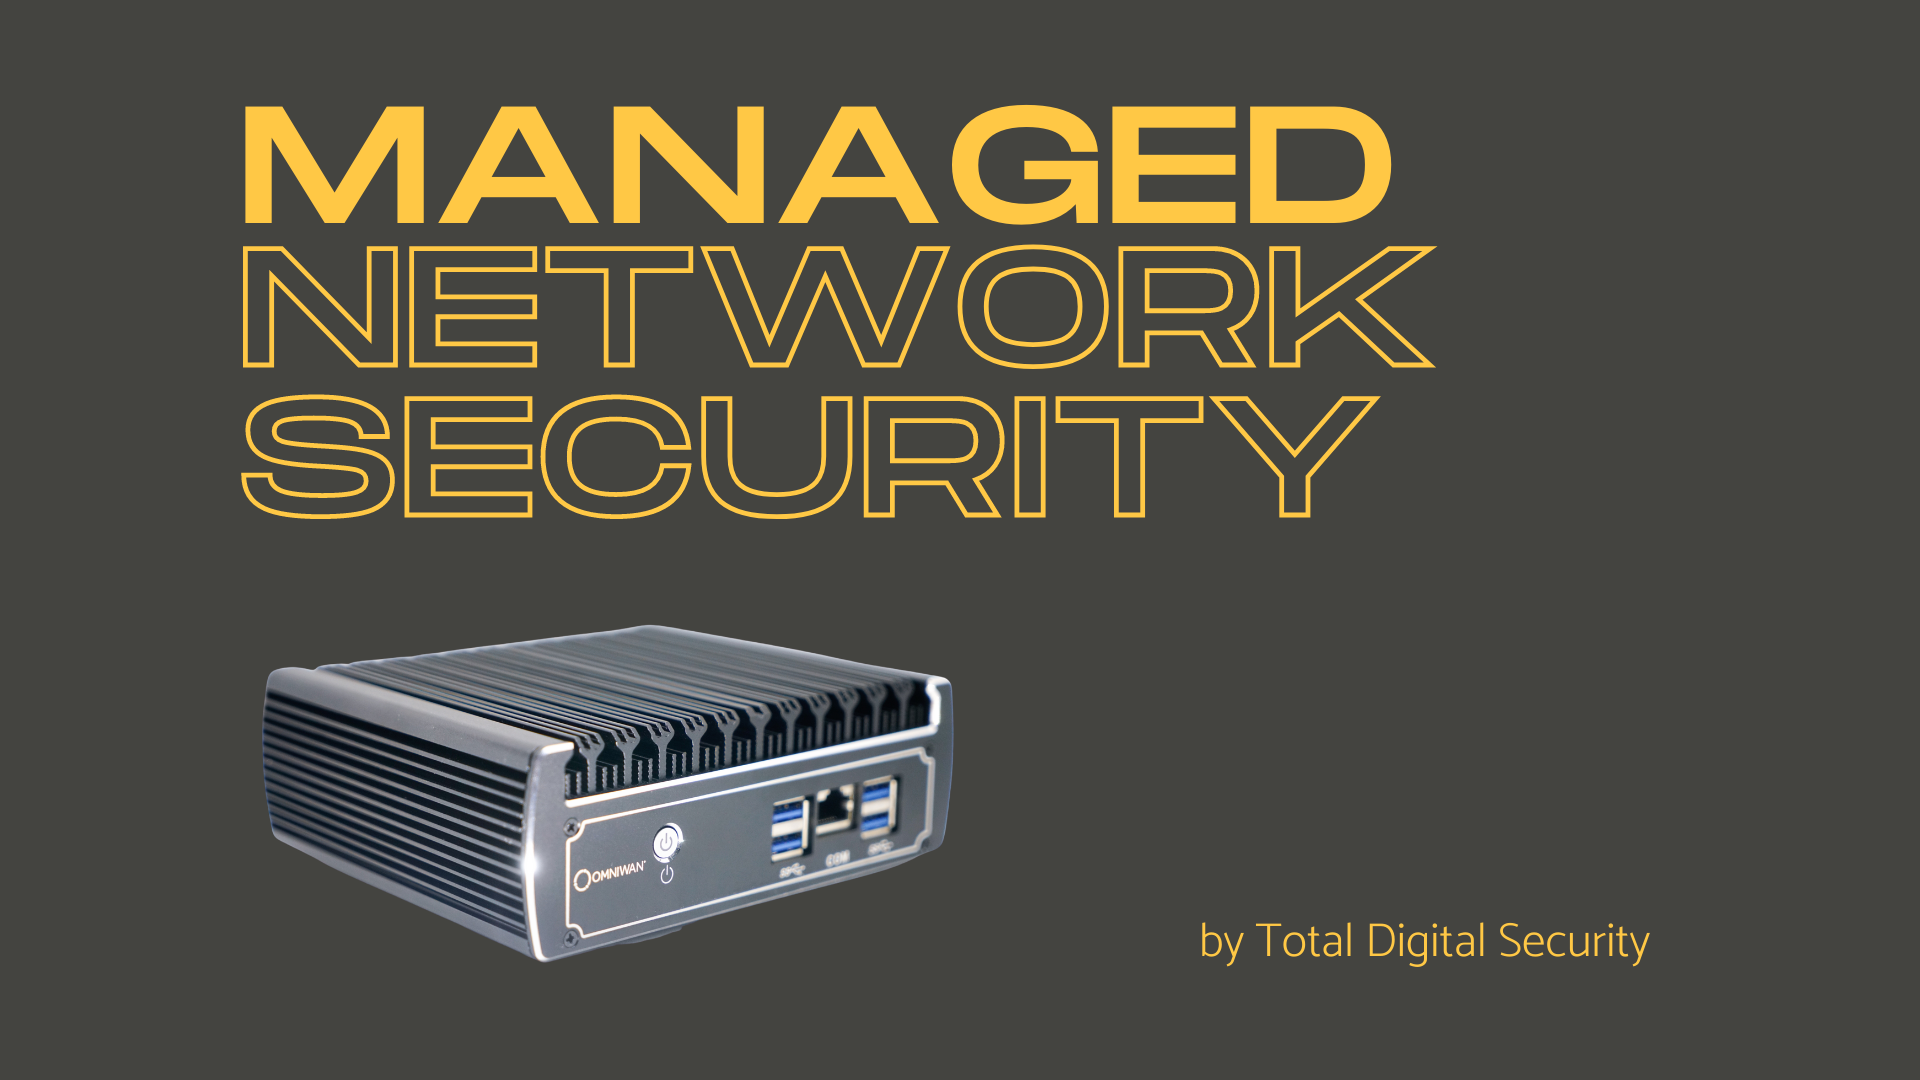 Managed Network Security for home internet routers